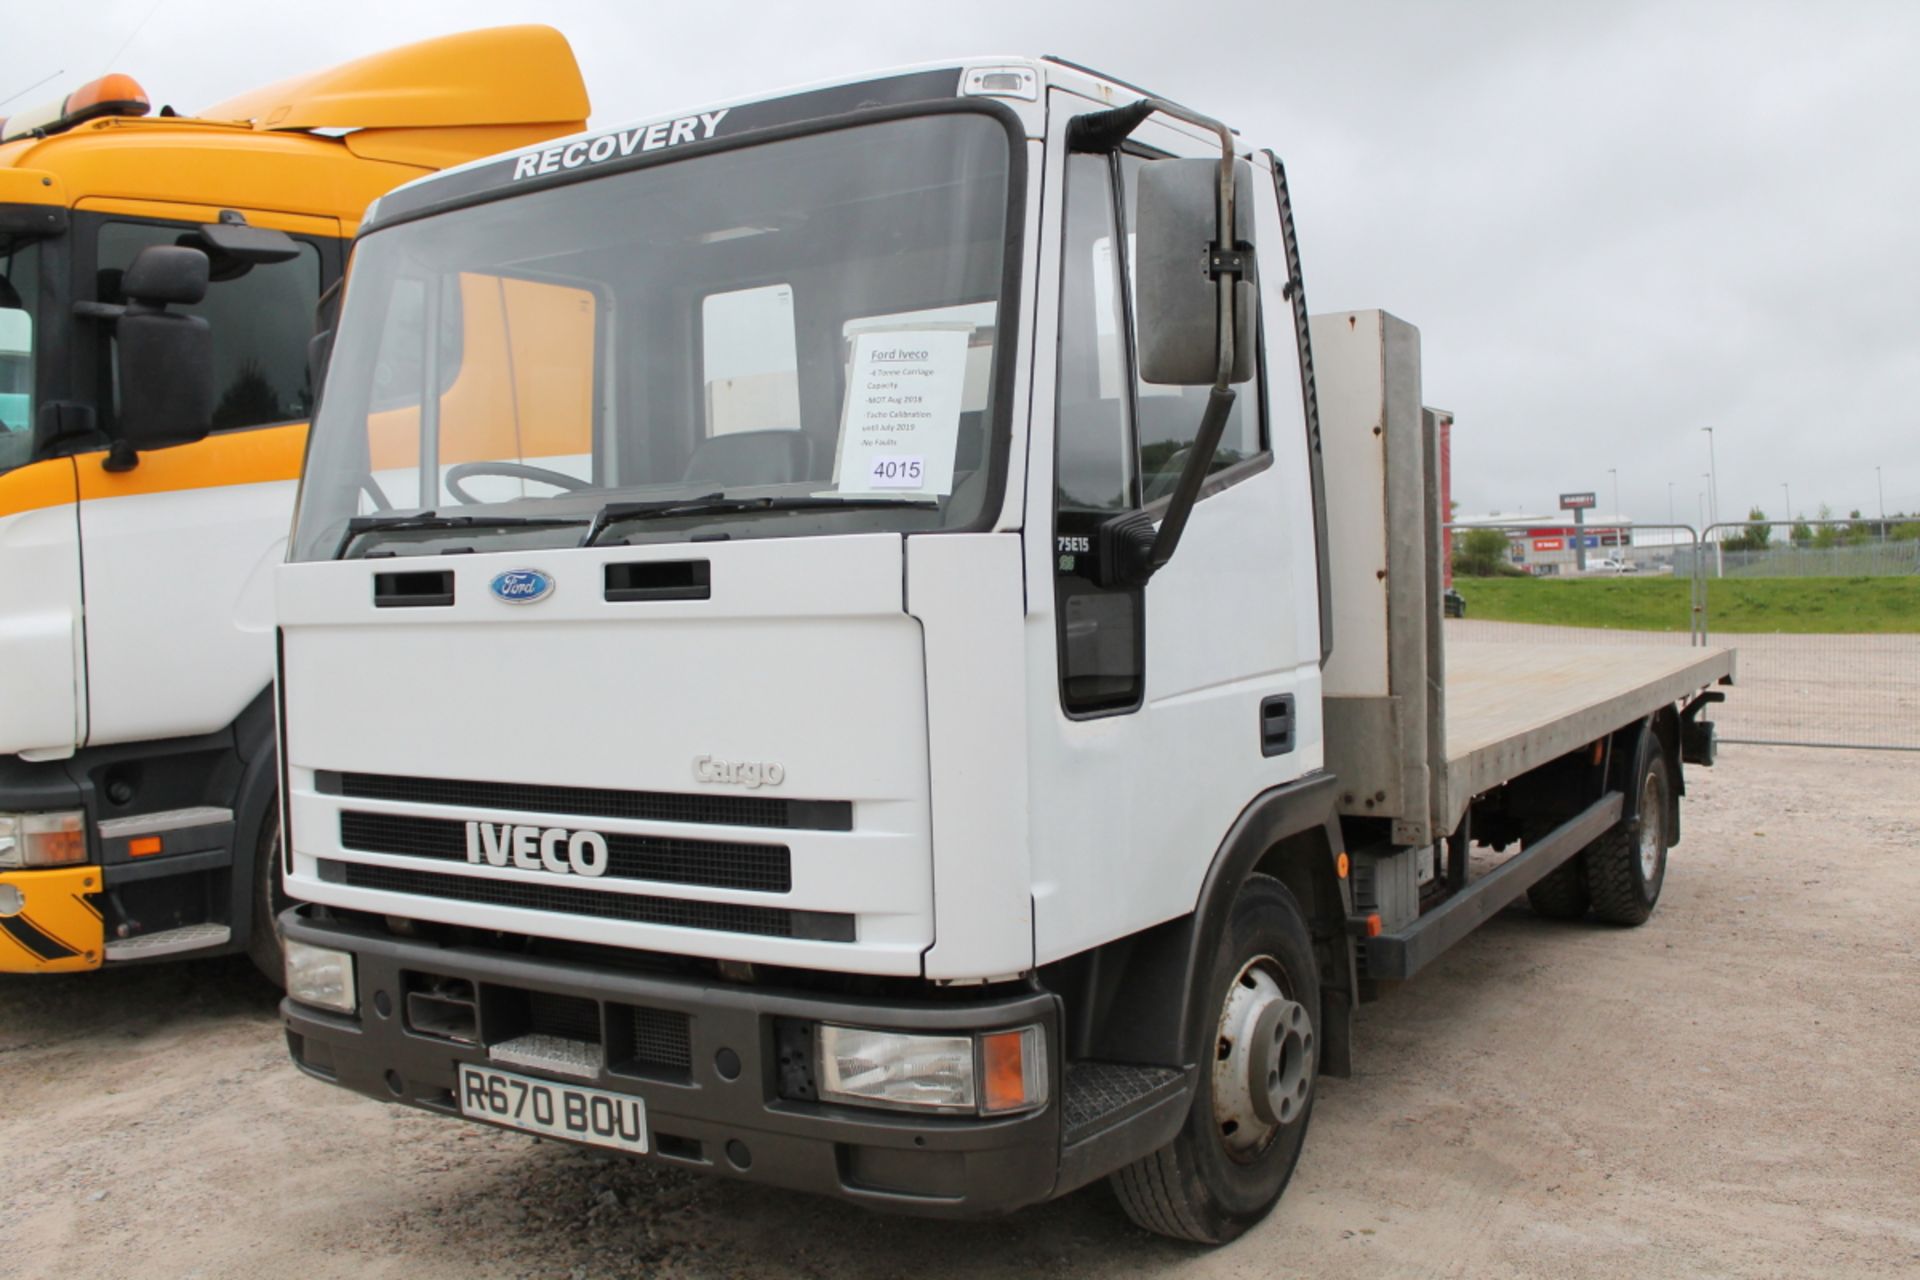 Iveco Ford New Cargo 75e15 D - 5861cc 2 Door Truck - Image 2 of 3